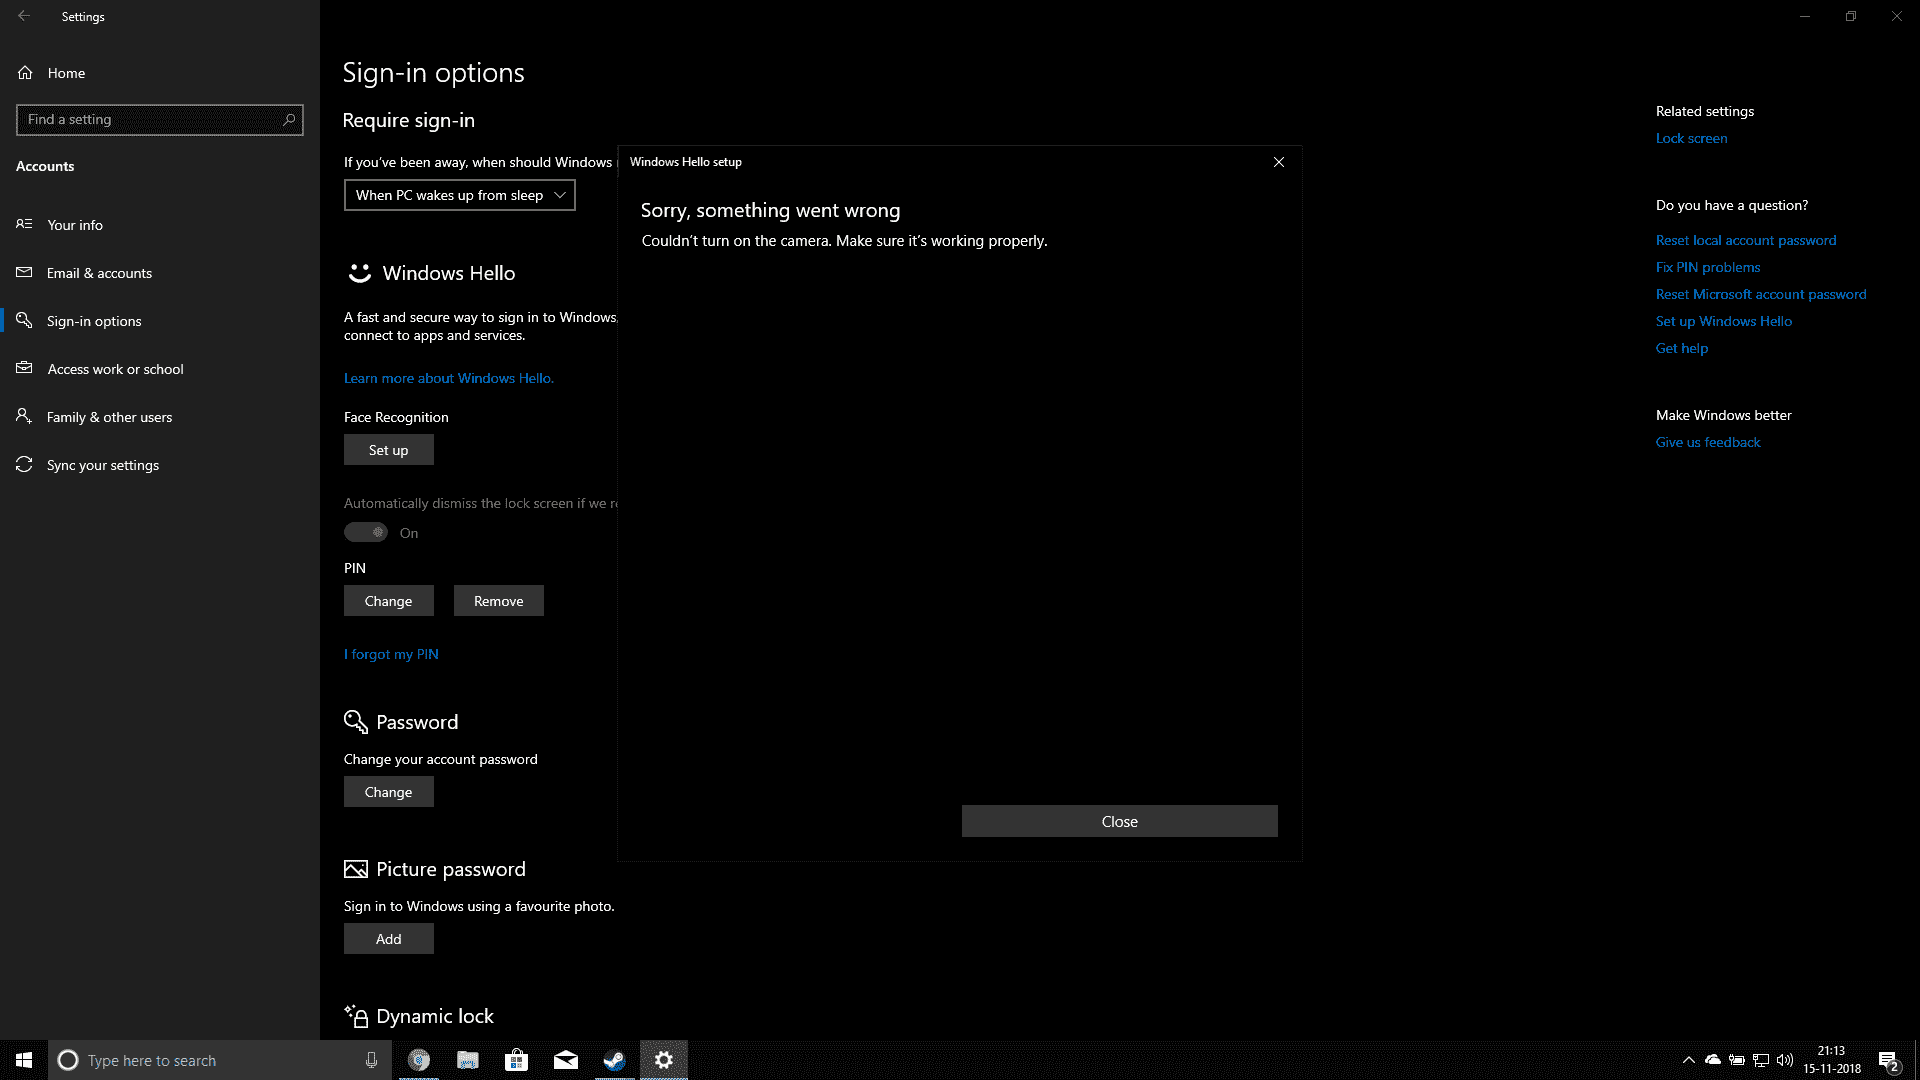 Windows Hello not Working from October's Update f9ea834f-63ce-4fc7-93d0-c38f53e56562?upload=true.png